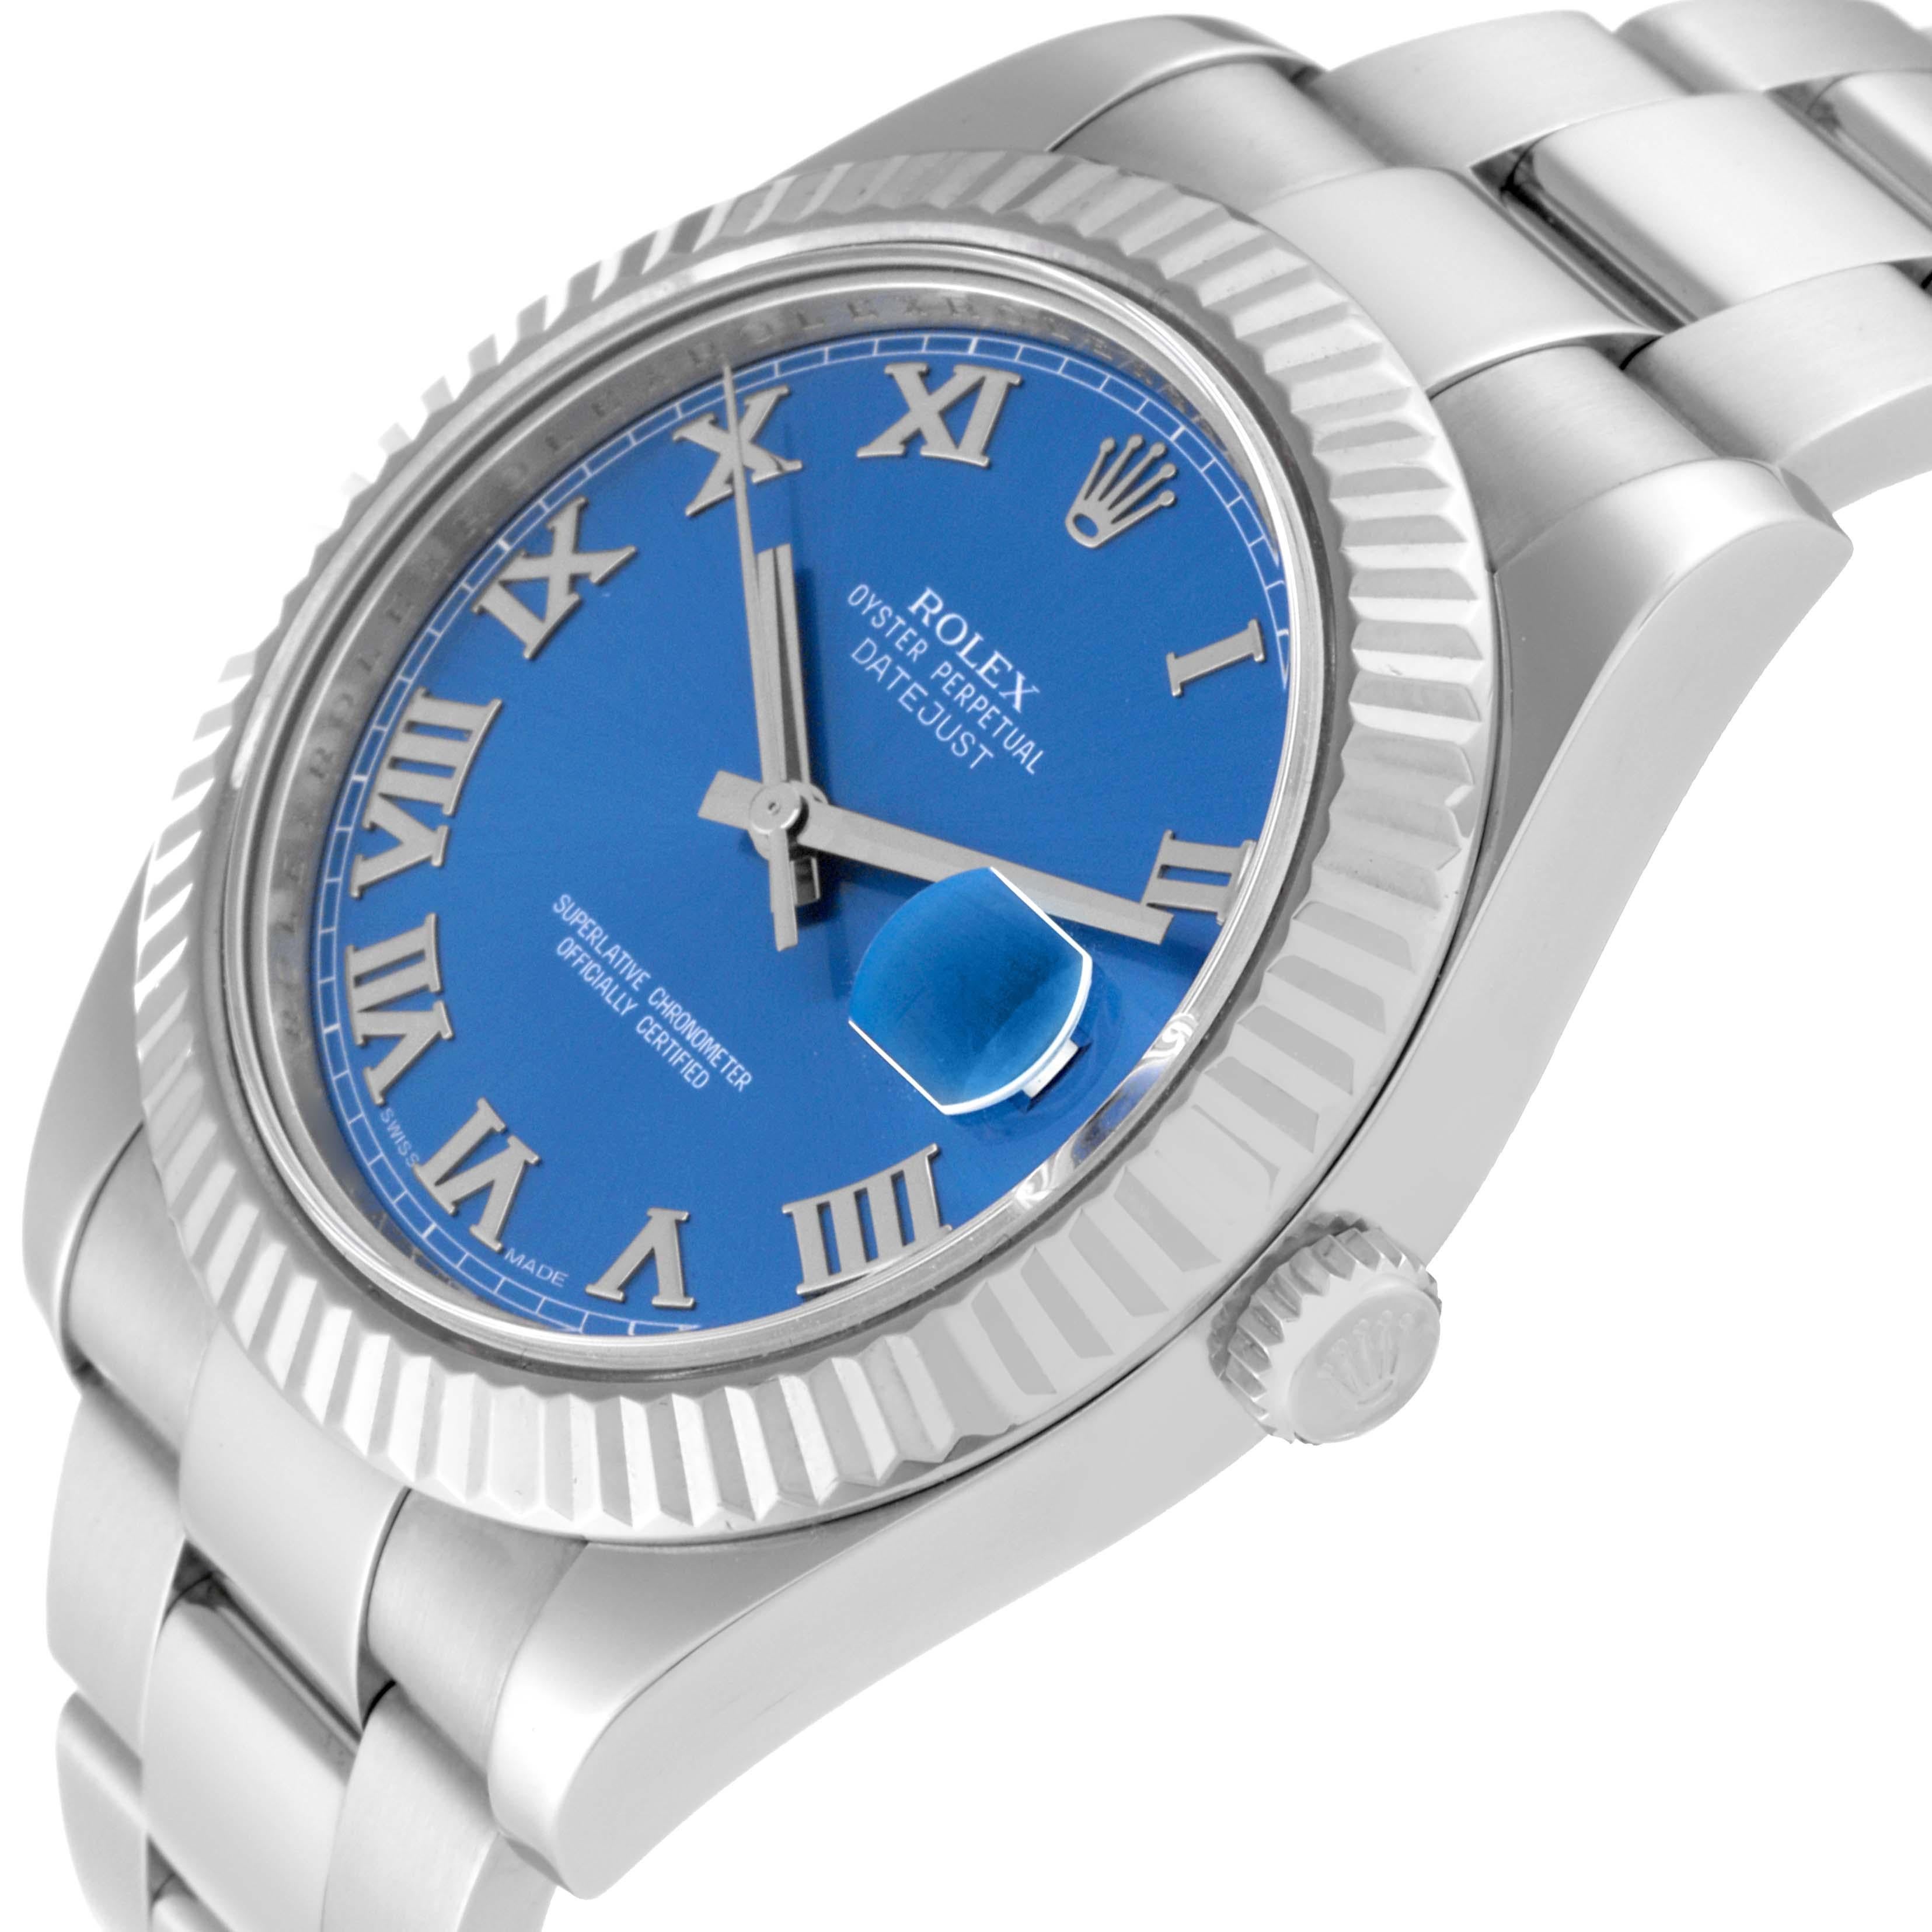 Rolex Datejust II Steel White Gold Blue Roman Dial Mens Watch 116334 For Sale 1